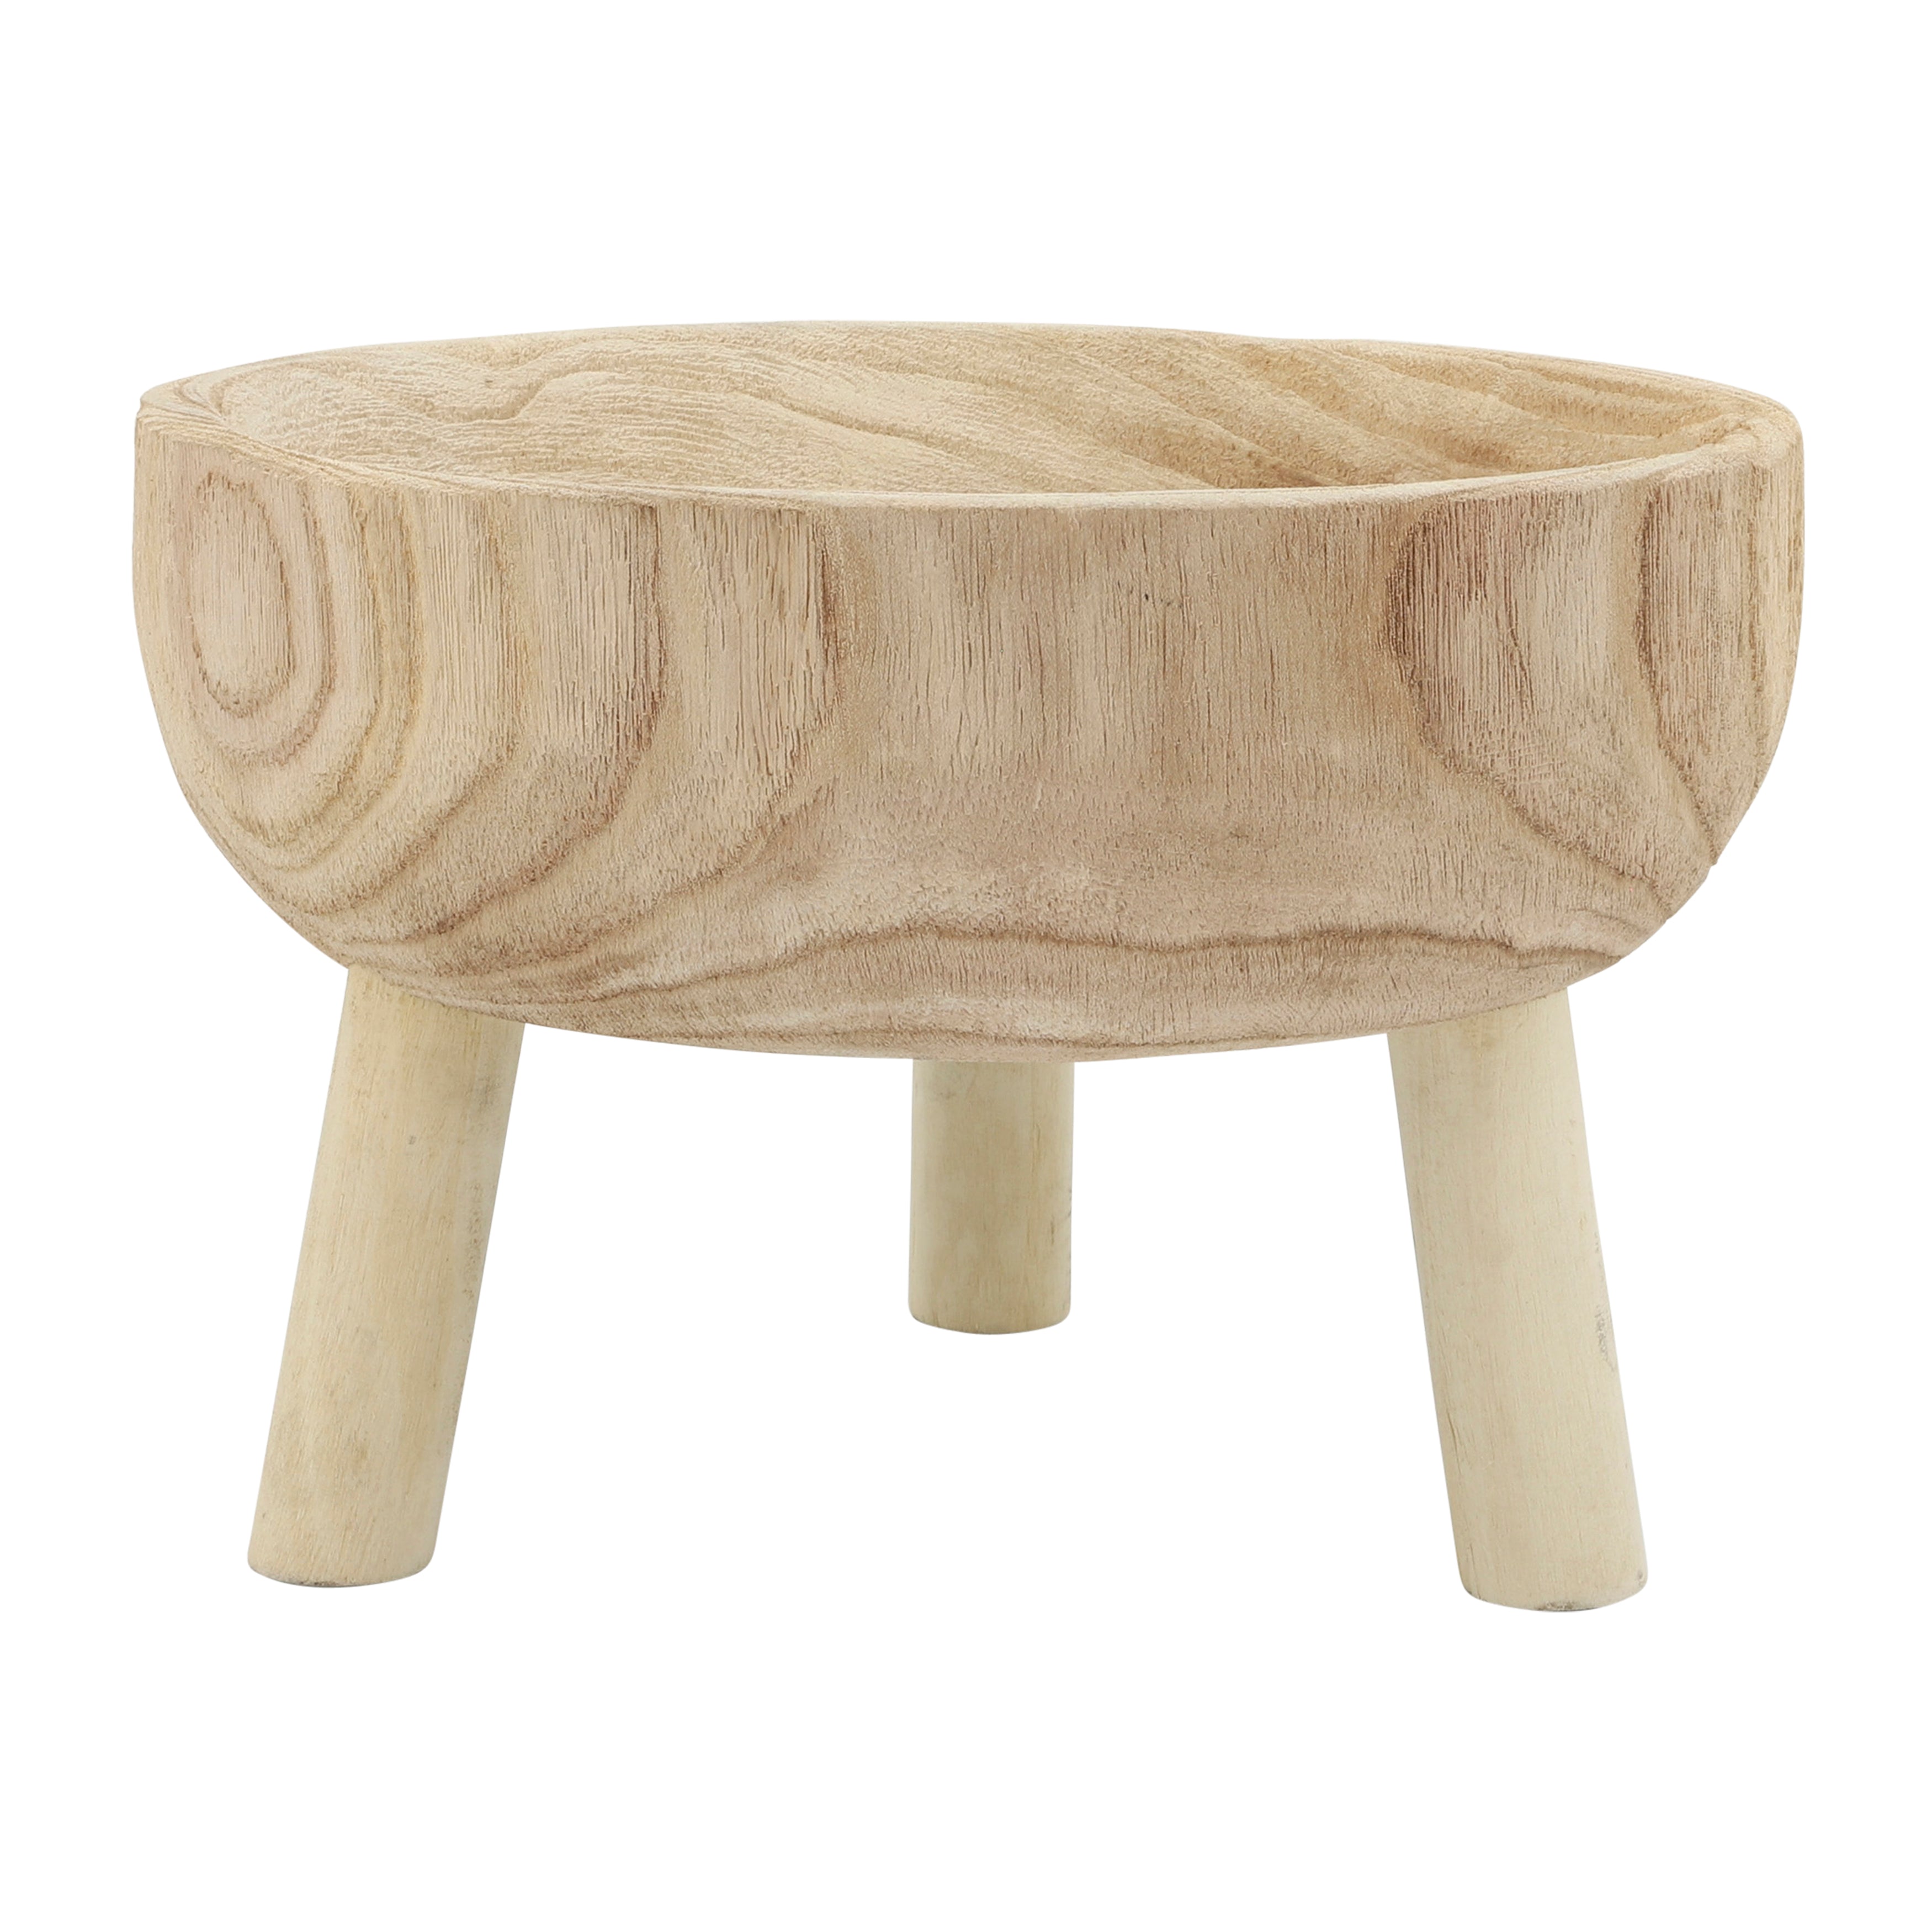 Wood Bowl With Legs - Natural